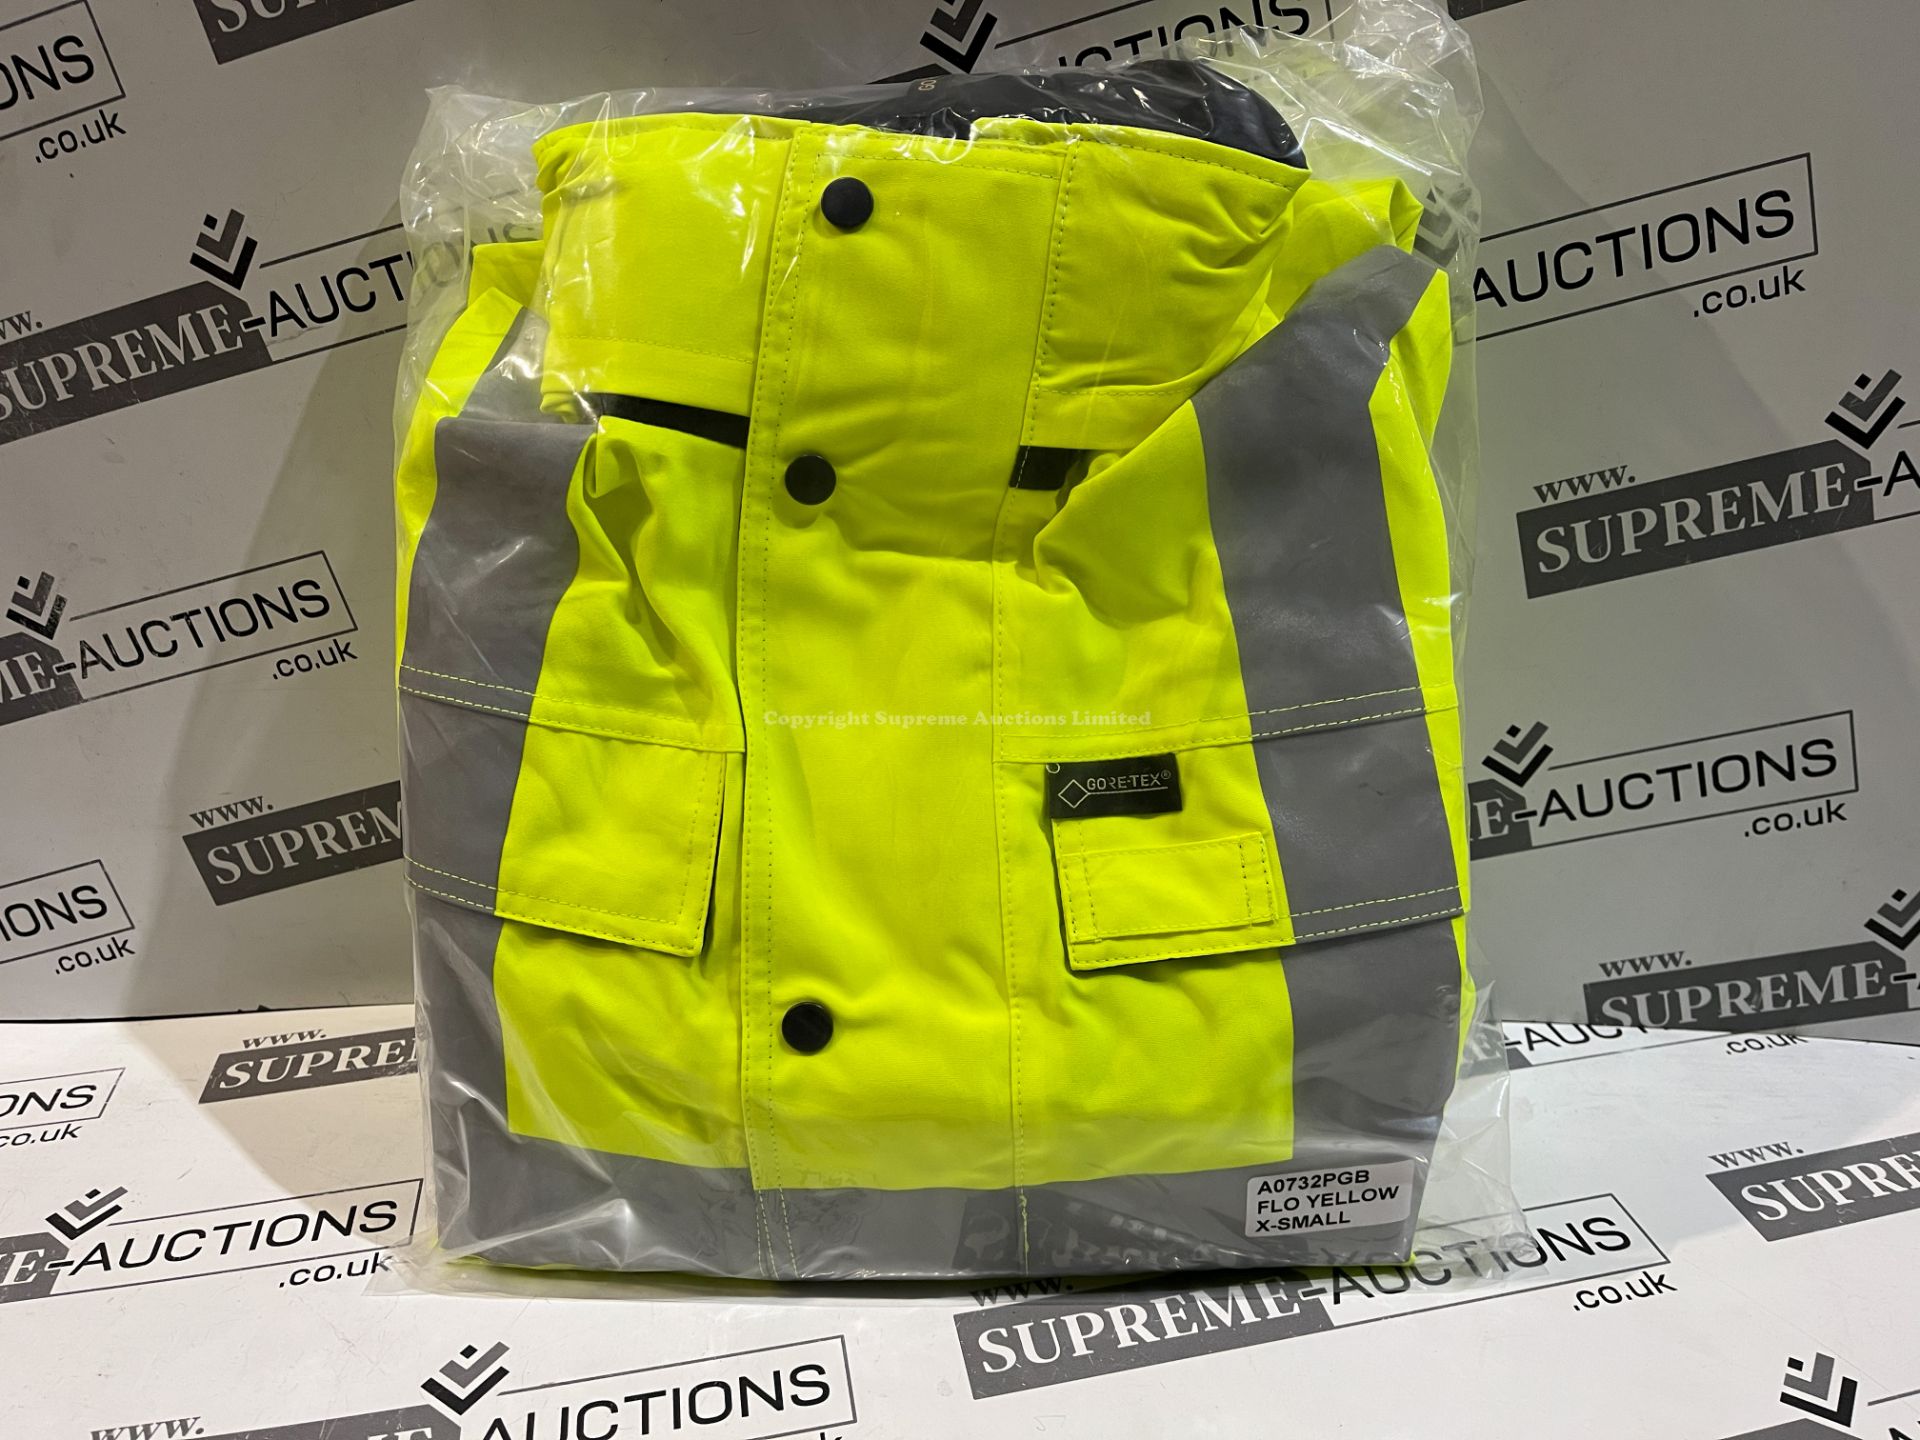 6x BRAND NEW PROFESSIONAL GORE-TEX HI-VIS WORK COATS IN VARIOUS SIZES. (R7-8)